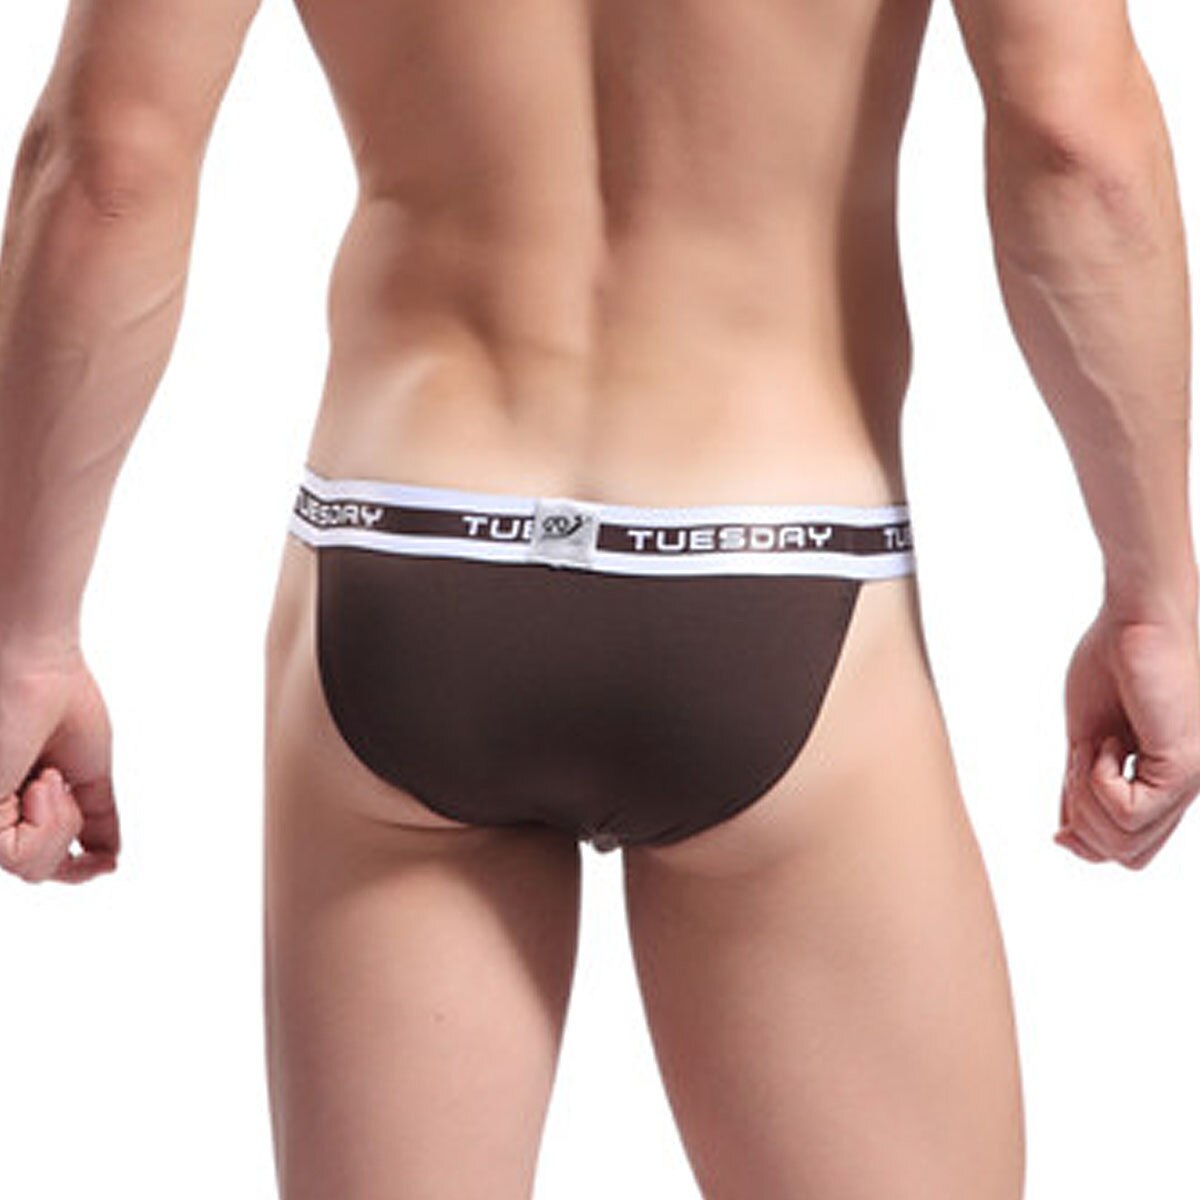 Mens Day of the Week Hipster Brief Tuesday